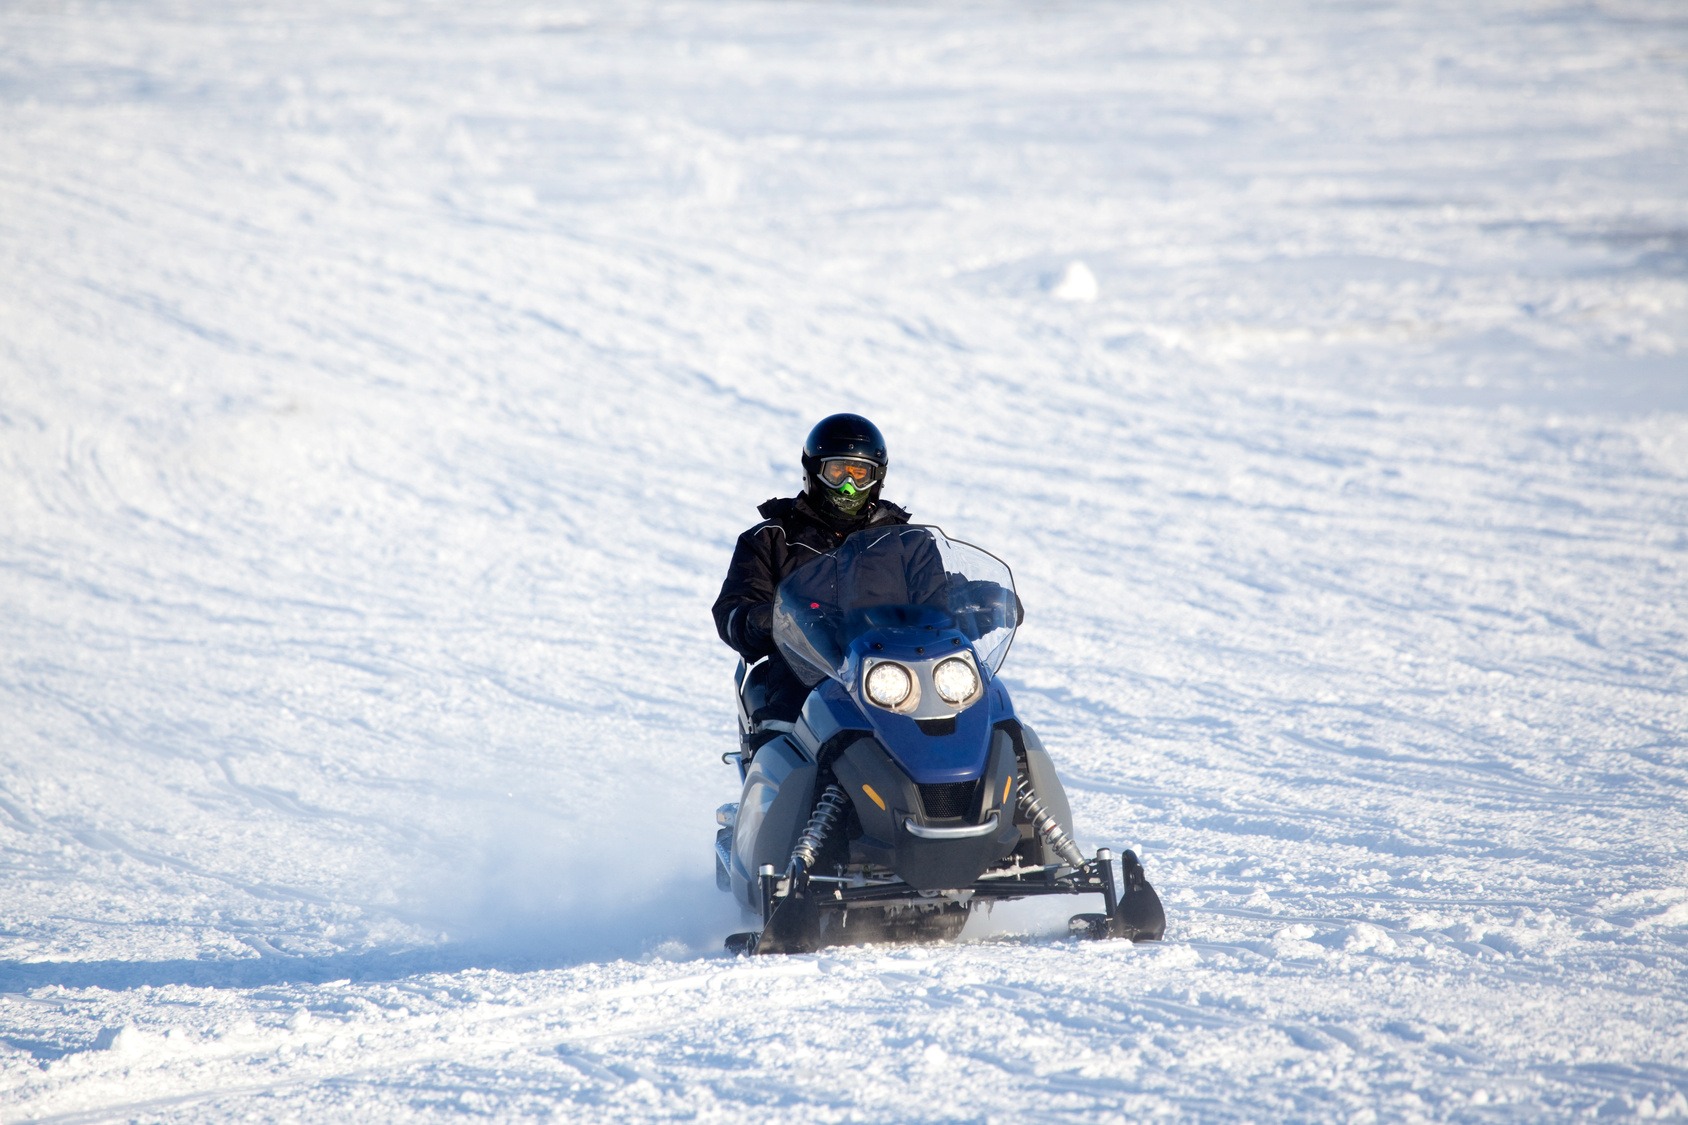 Tips for Insuring Your Winter Toys